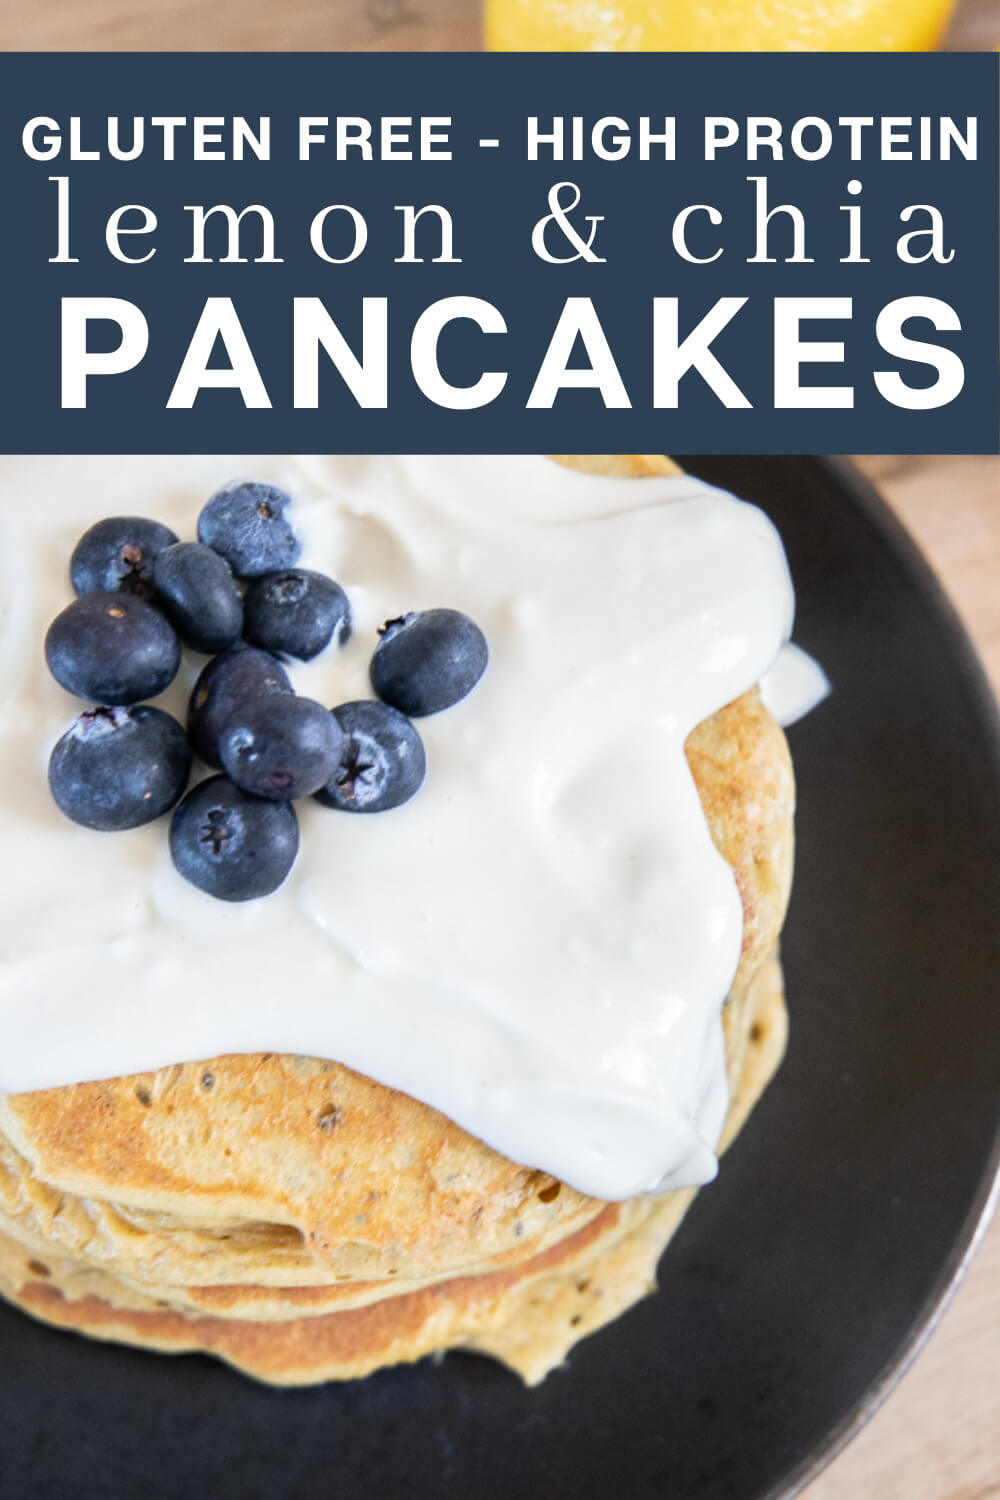 Make these amazing lemon chia high protein pancakes right now! These are gluten free, full of protein, easy to make, and taste amazing!